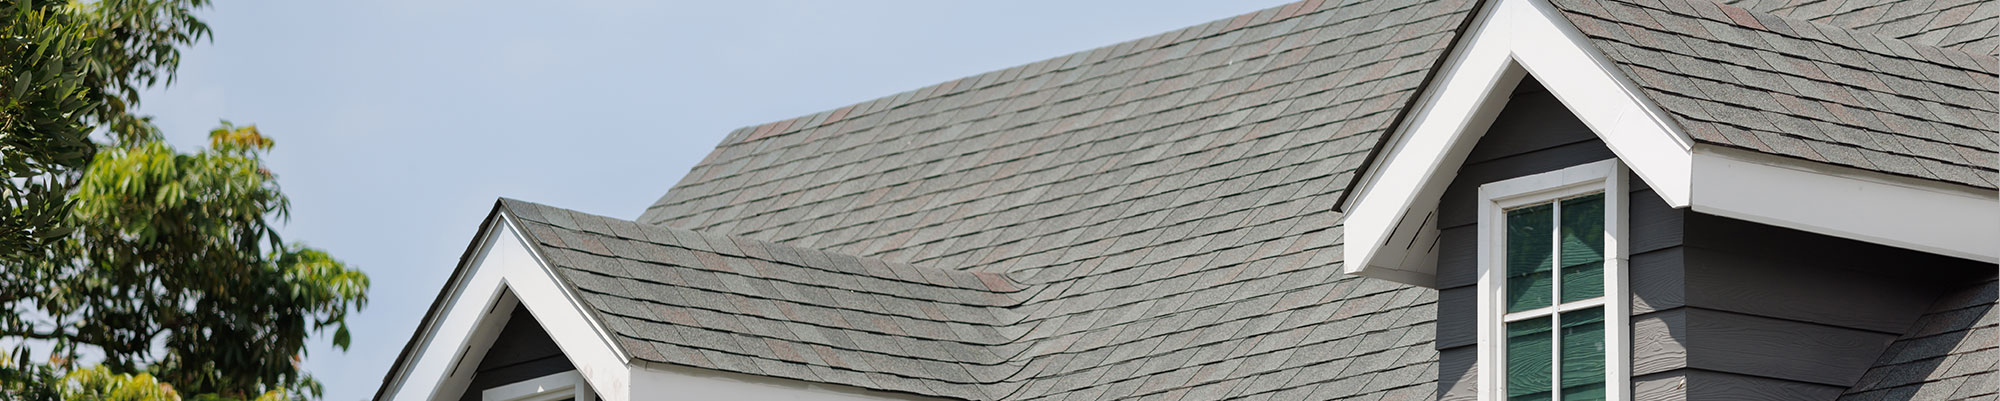 South Milwaukee roof replacement company